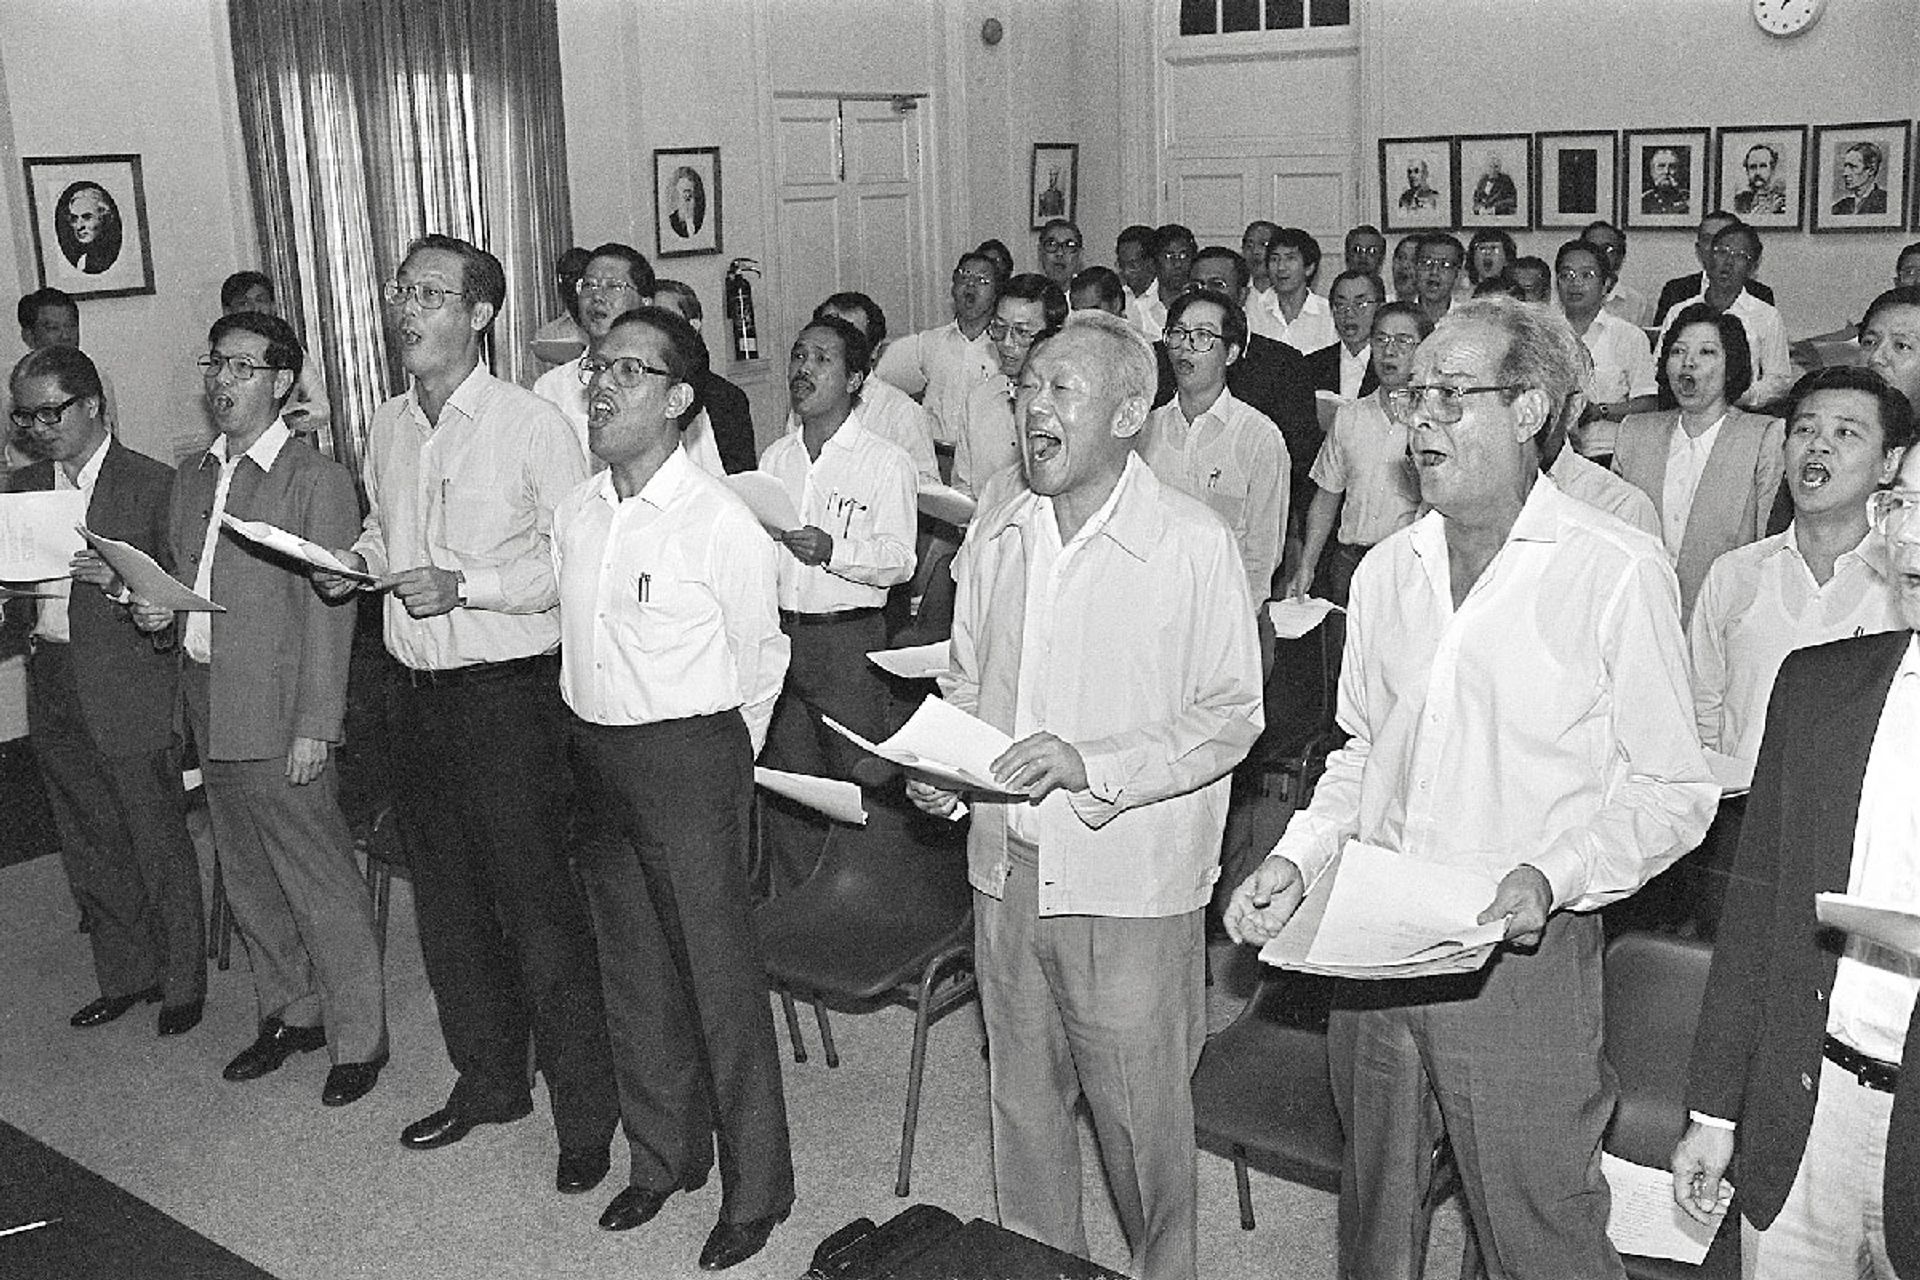 Mr Lee and Cabinet ministers (front row, from left) Tony Tan, Ong Teng Cheong, Goh Chok Tong, Ahmad Mattar and E.W. Barker rehearsing for a full-throated National Day performance on July 28, 1987. Mr Lee’s favourite song was Stand Up For Singapore “because I hear my grandchildren singing it all the time”, he told The Straits Times. ST Photo: Wong Kwai Chow